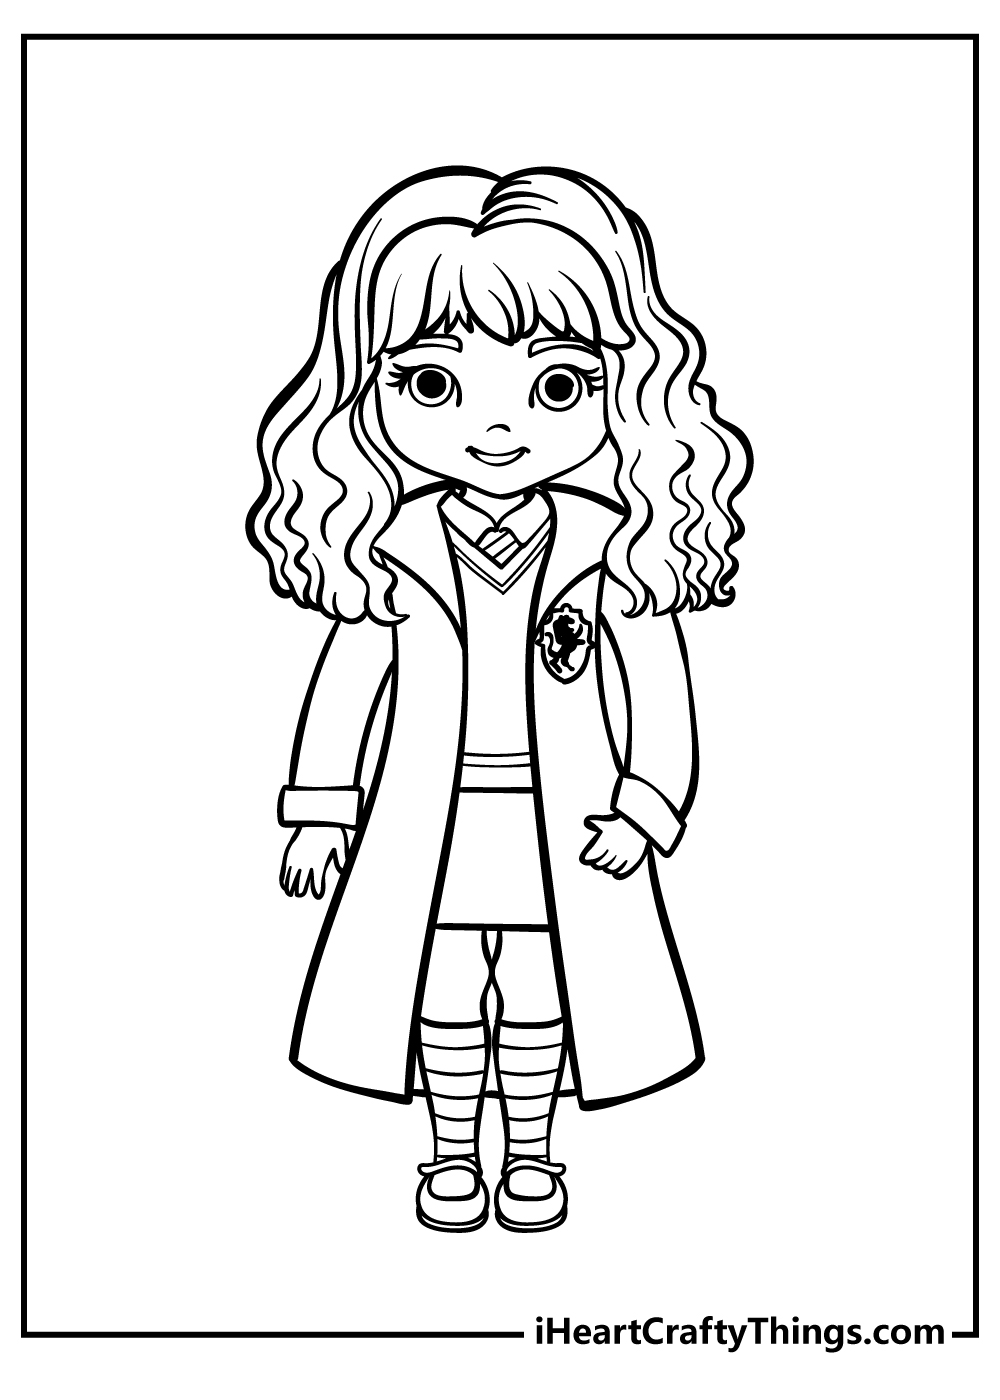 Printable Harry Potter Coloring Pages Updated 20